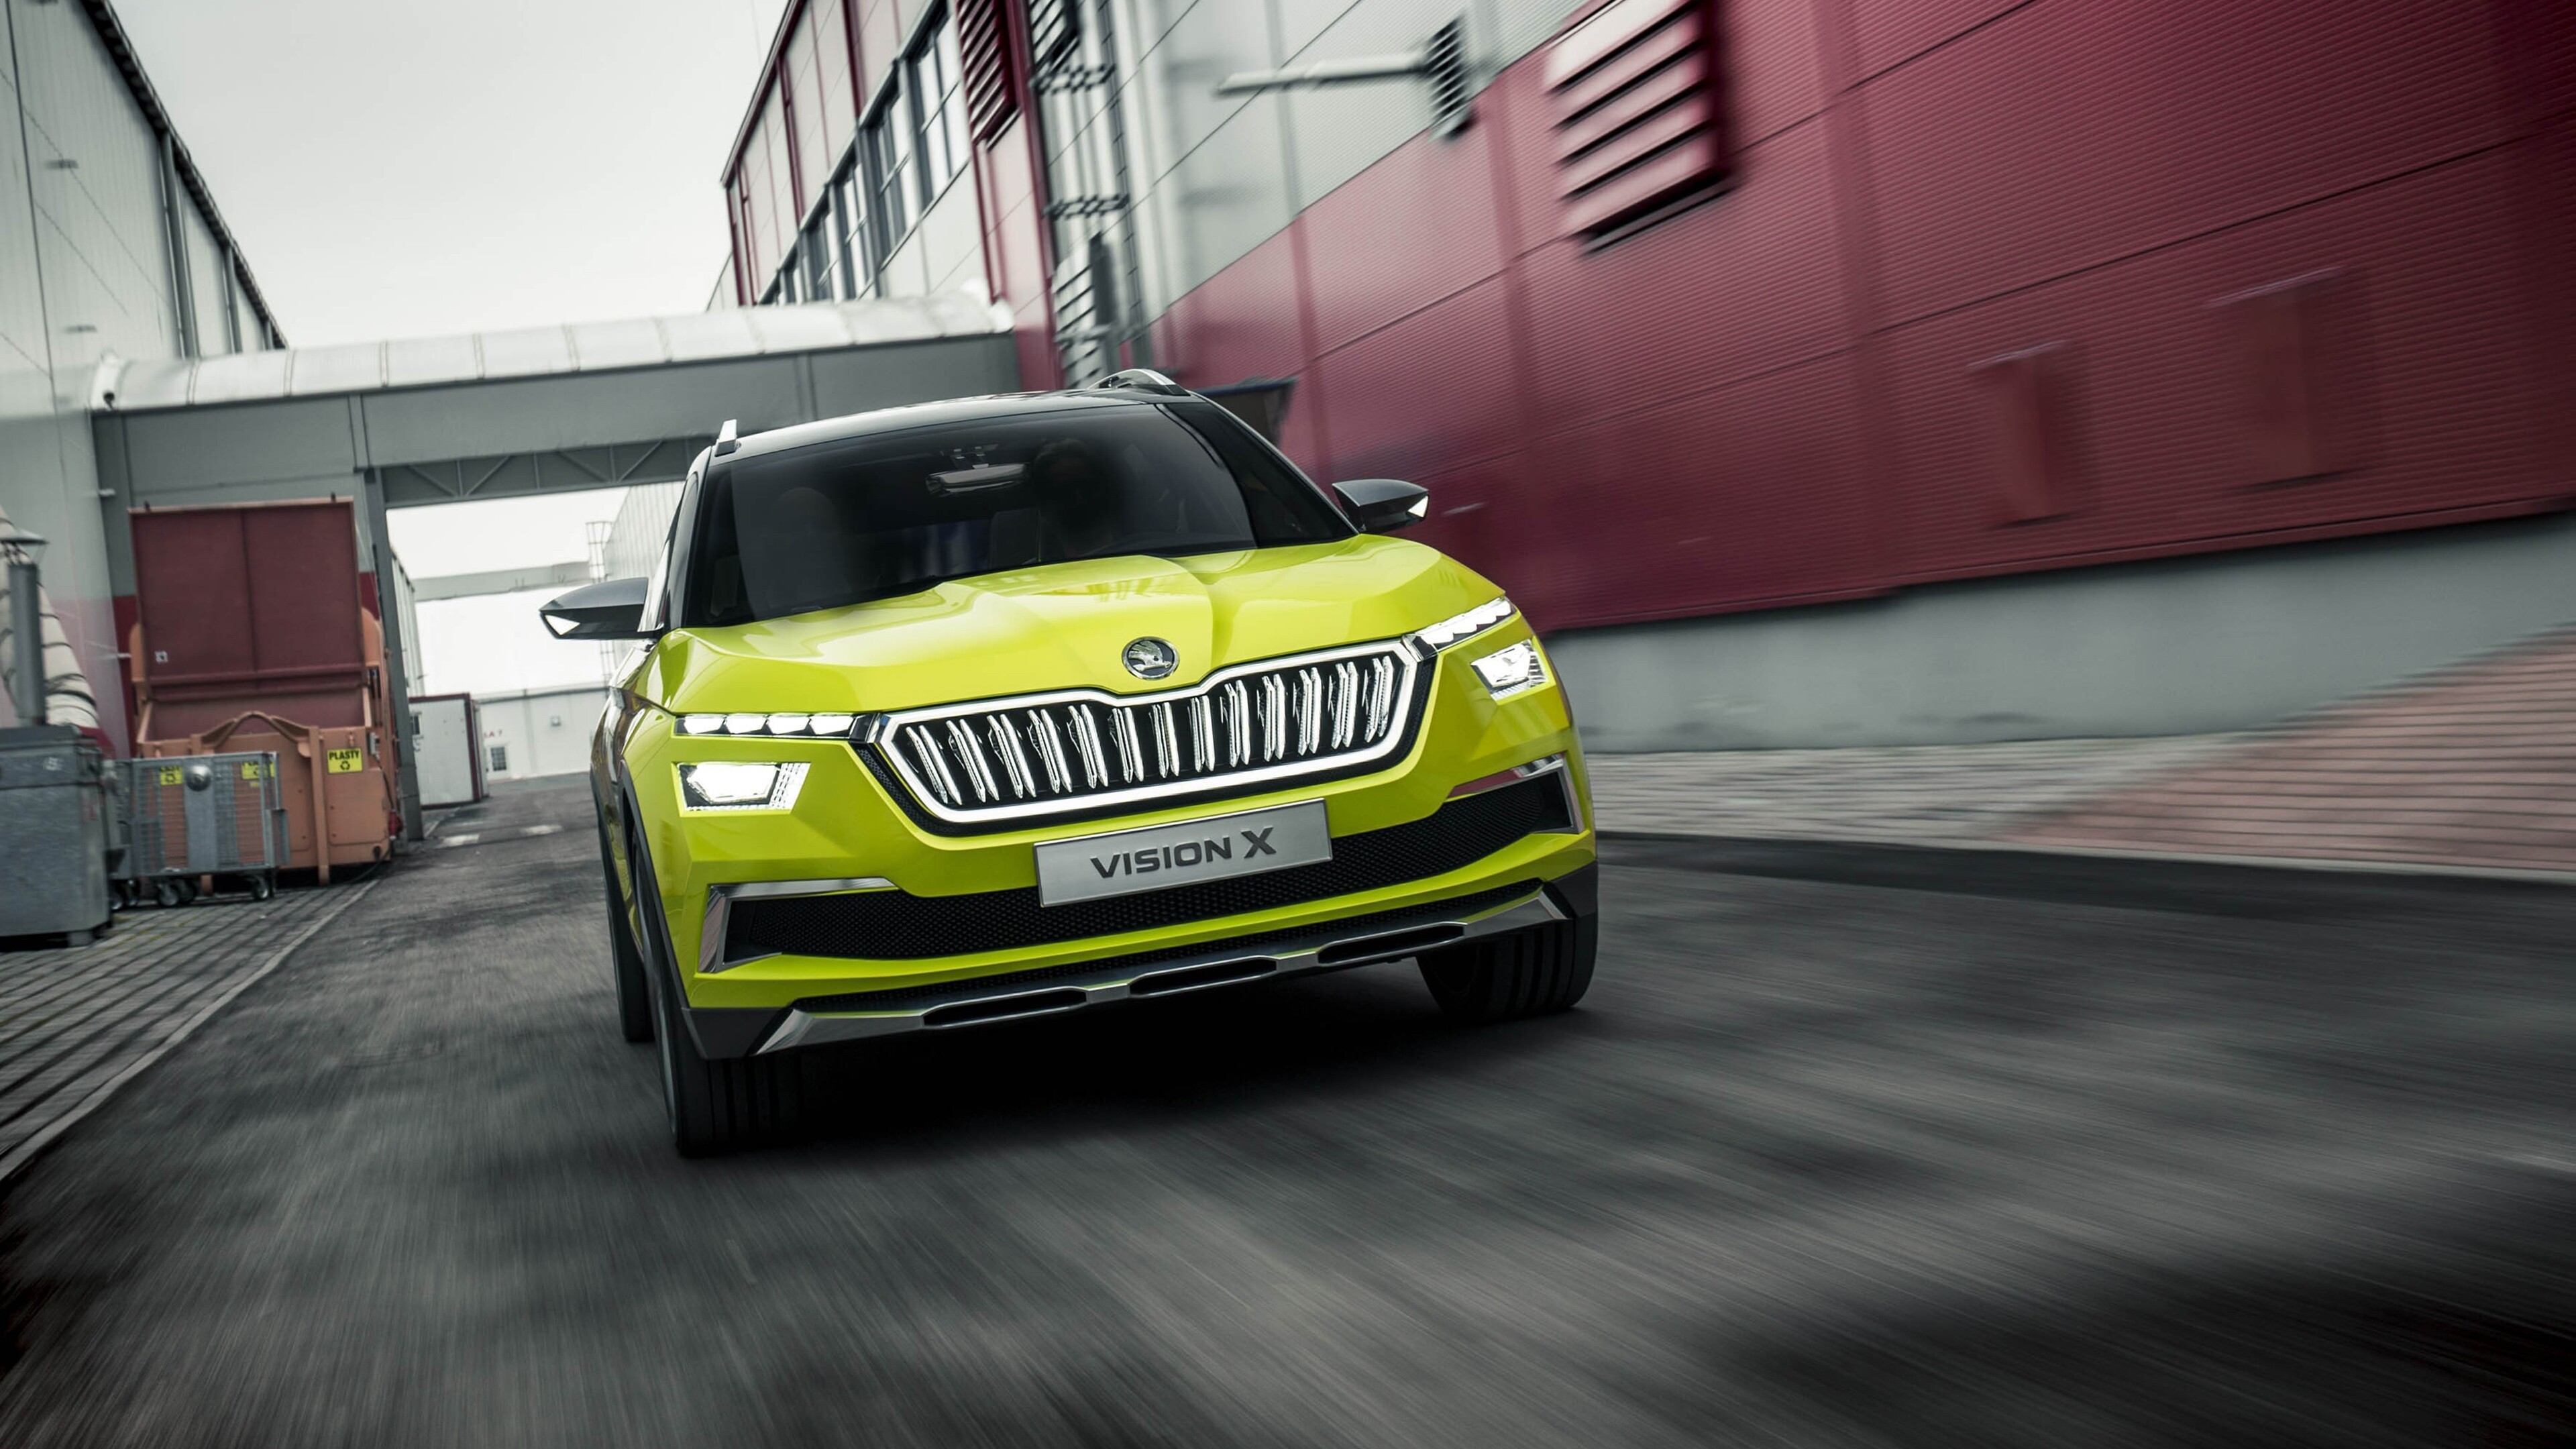 Skoda: Vision X 2018, Lime, Front View, Movement. 3840x2160 4K Wallpaper.